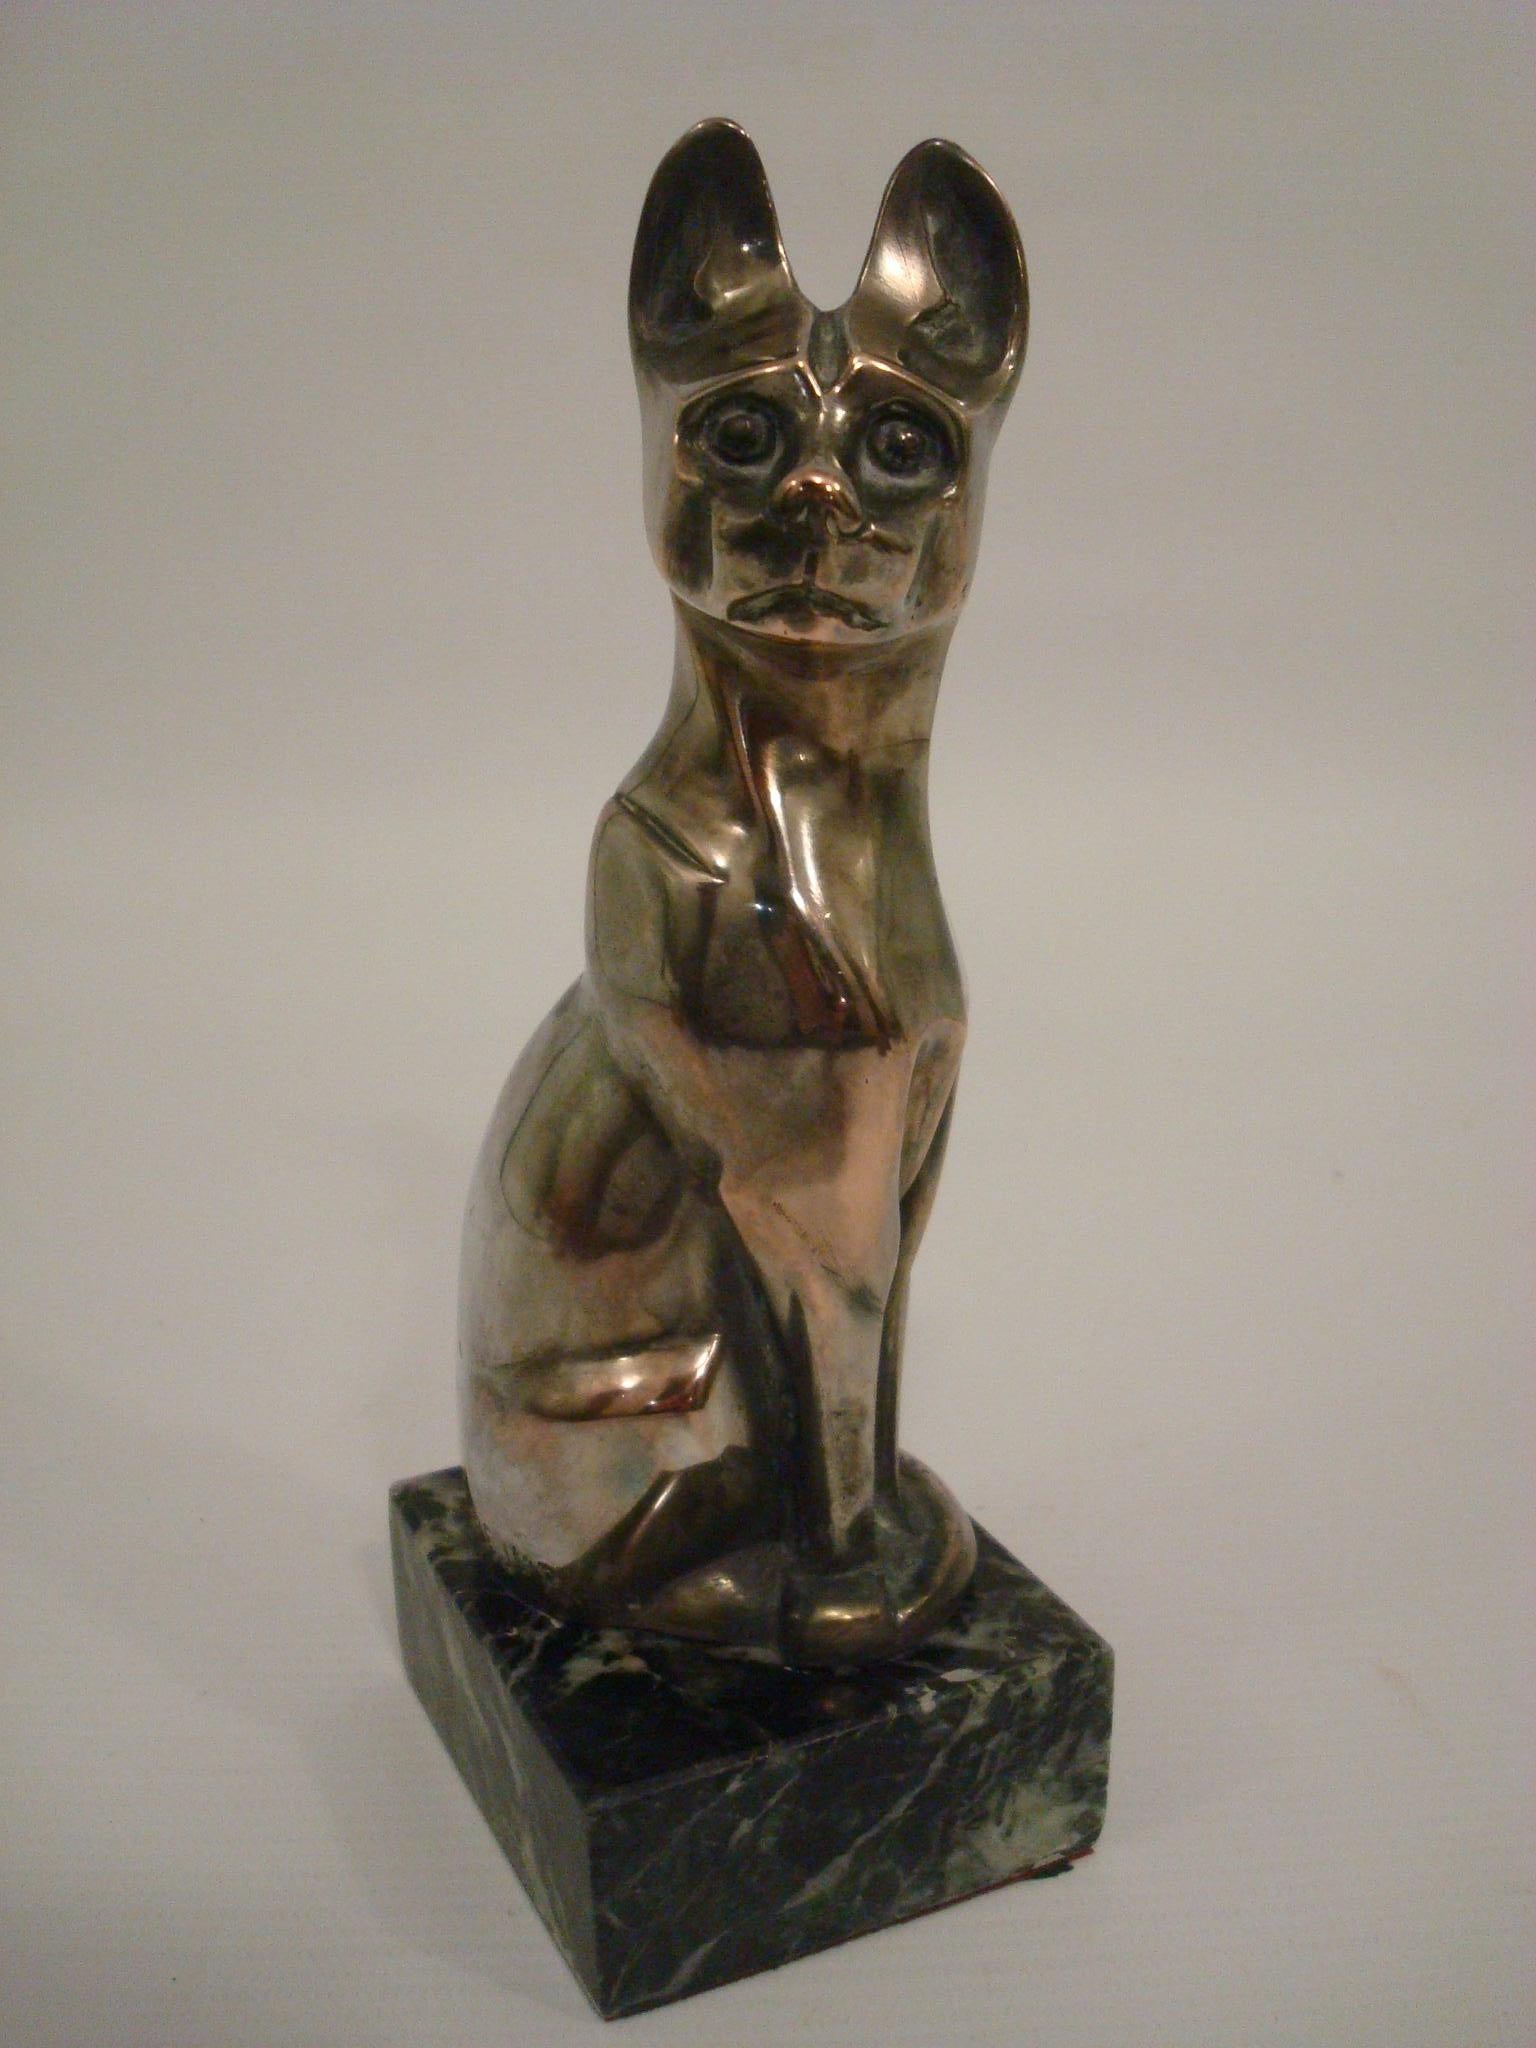 Very Rare Art Deco French silver plated bronze sculpture figure of a cat, ' Chat De Siam Assis ‘. This figure was produced as paperweight and also as car mascot (Perfect gift for any Hood Ornament - Mascotte Voiture - Automobilia Fan)
Inscribed Ed.